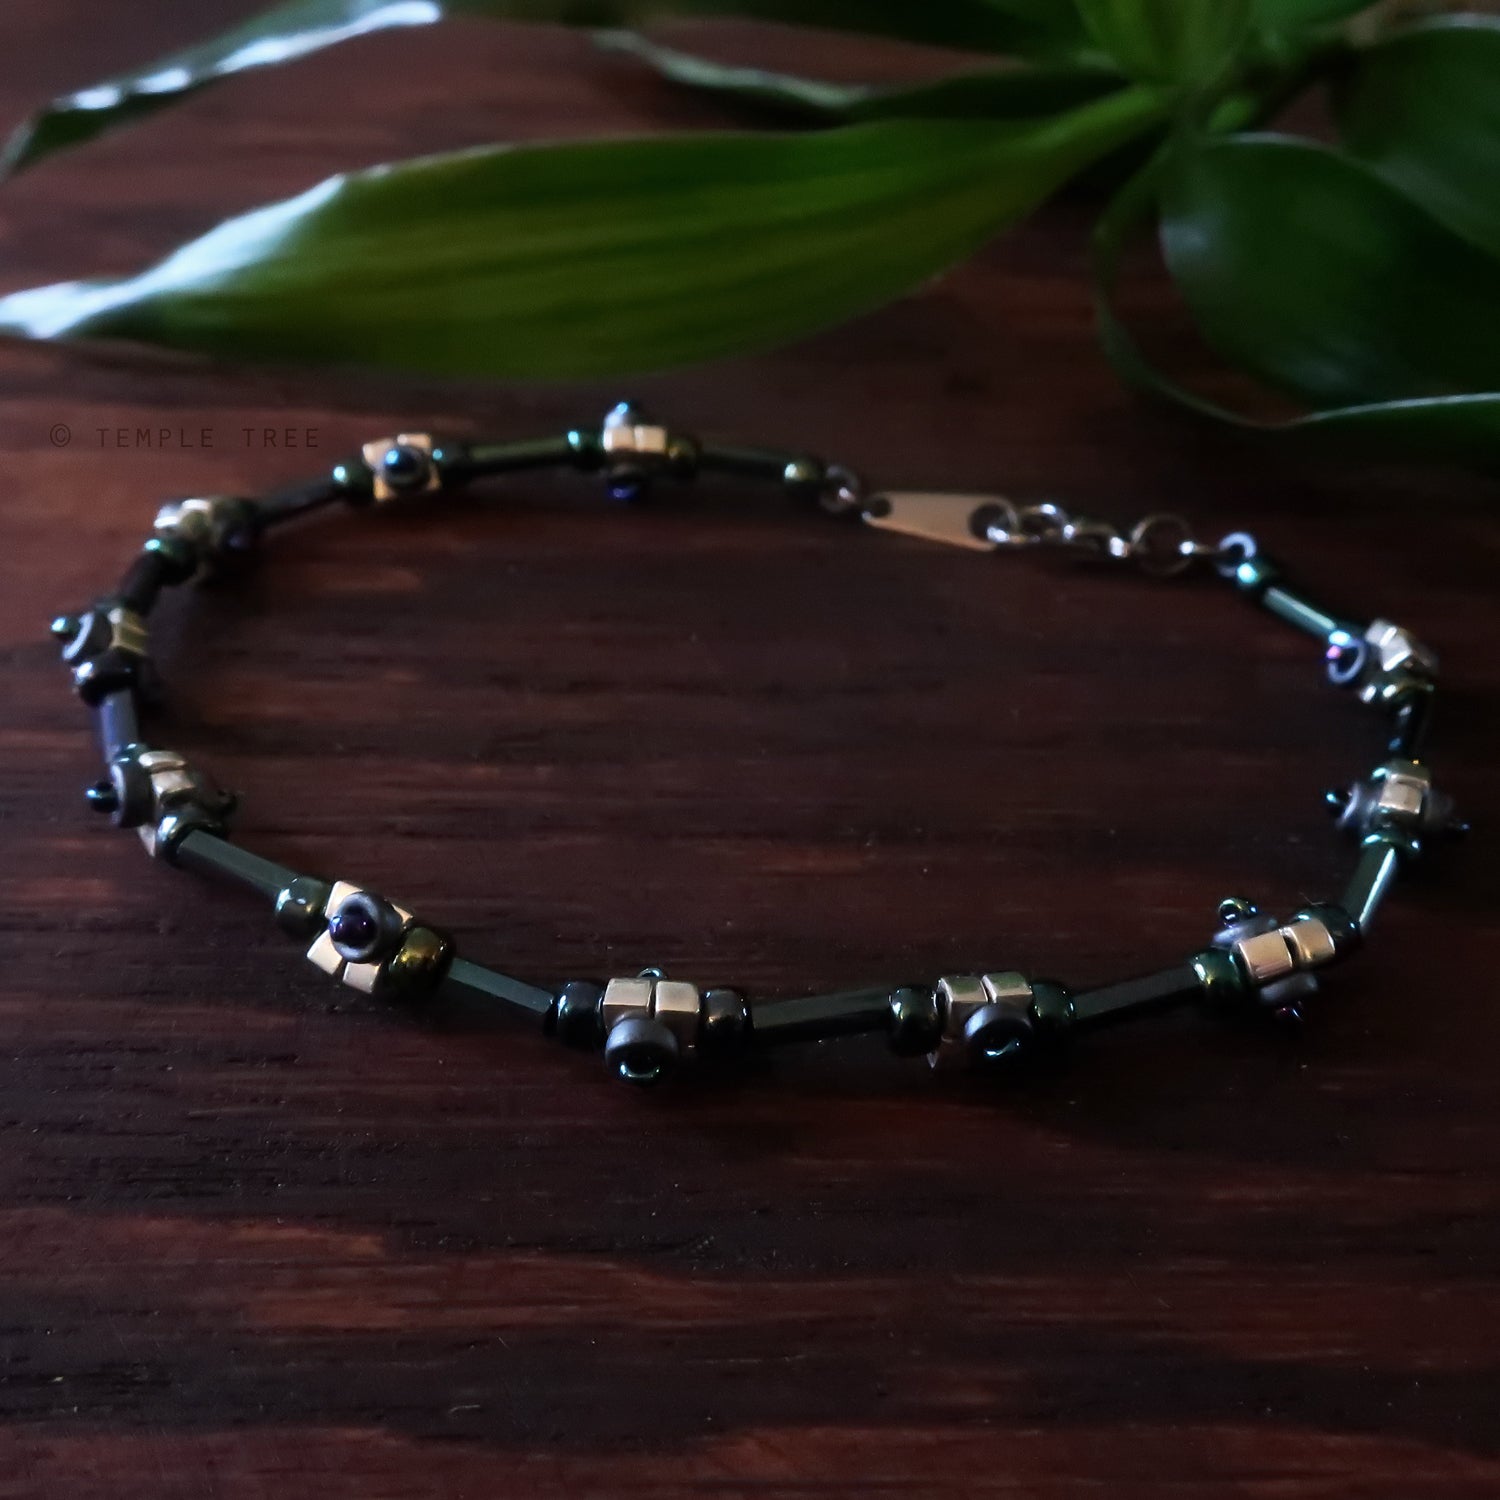 Temple Tree Lost Circuitry Beadwoven Bracelet with Rivets v3 - NeoChrome (silver)